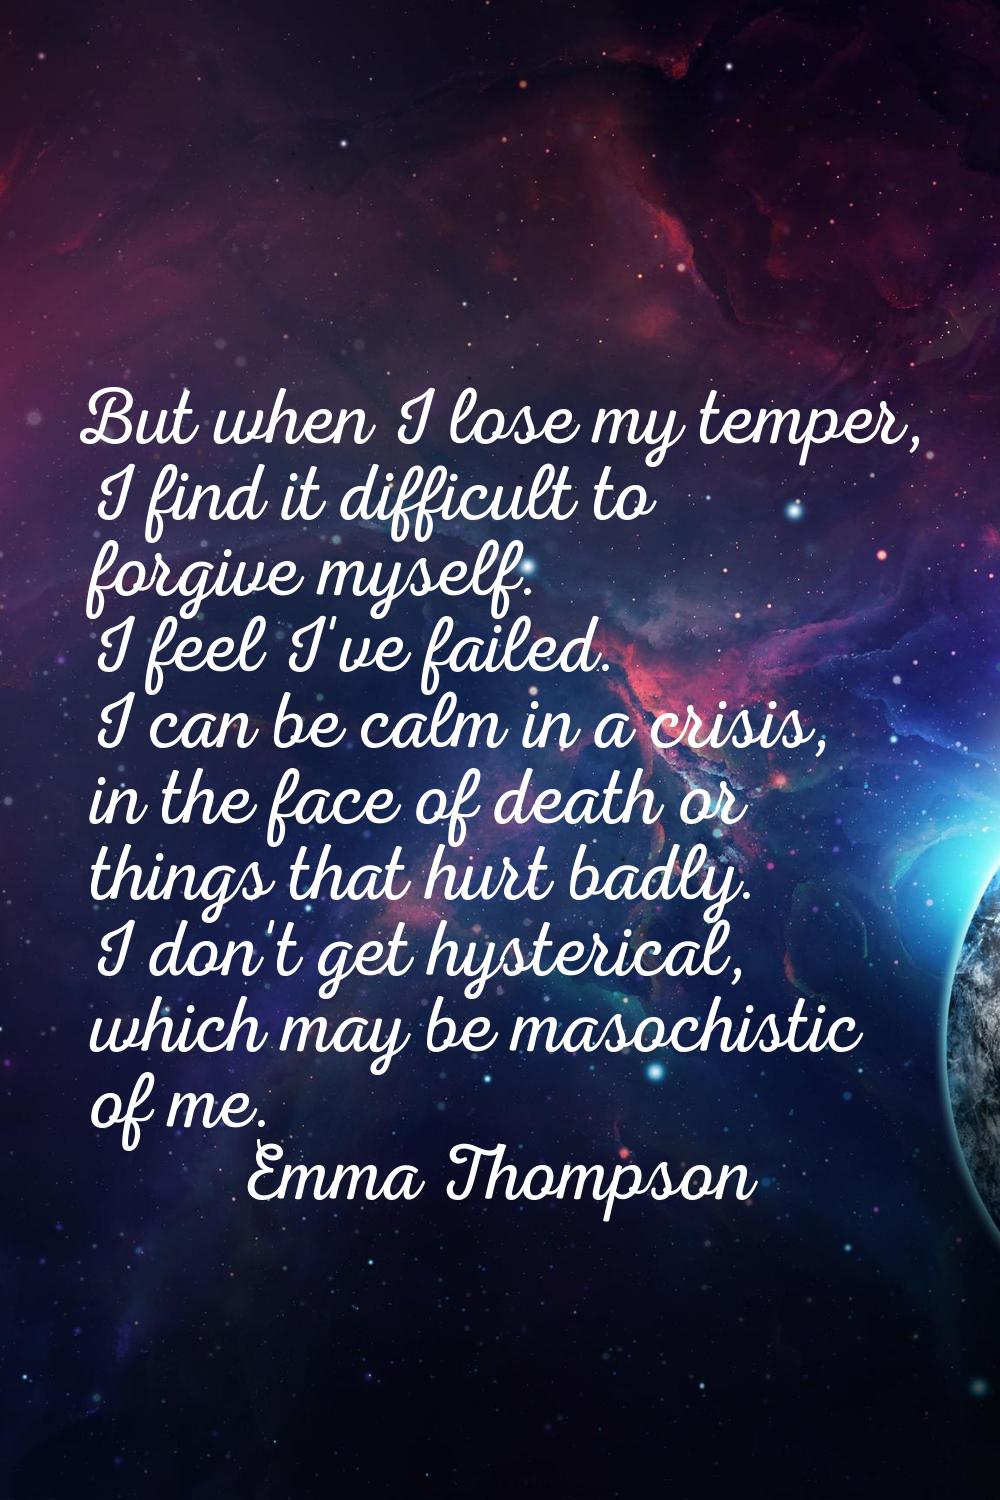 But when I lose my temper, I find it difficult to forgive myself. I feel I've failed. I can be calm